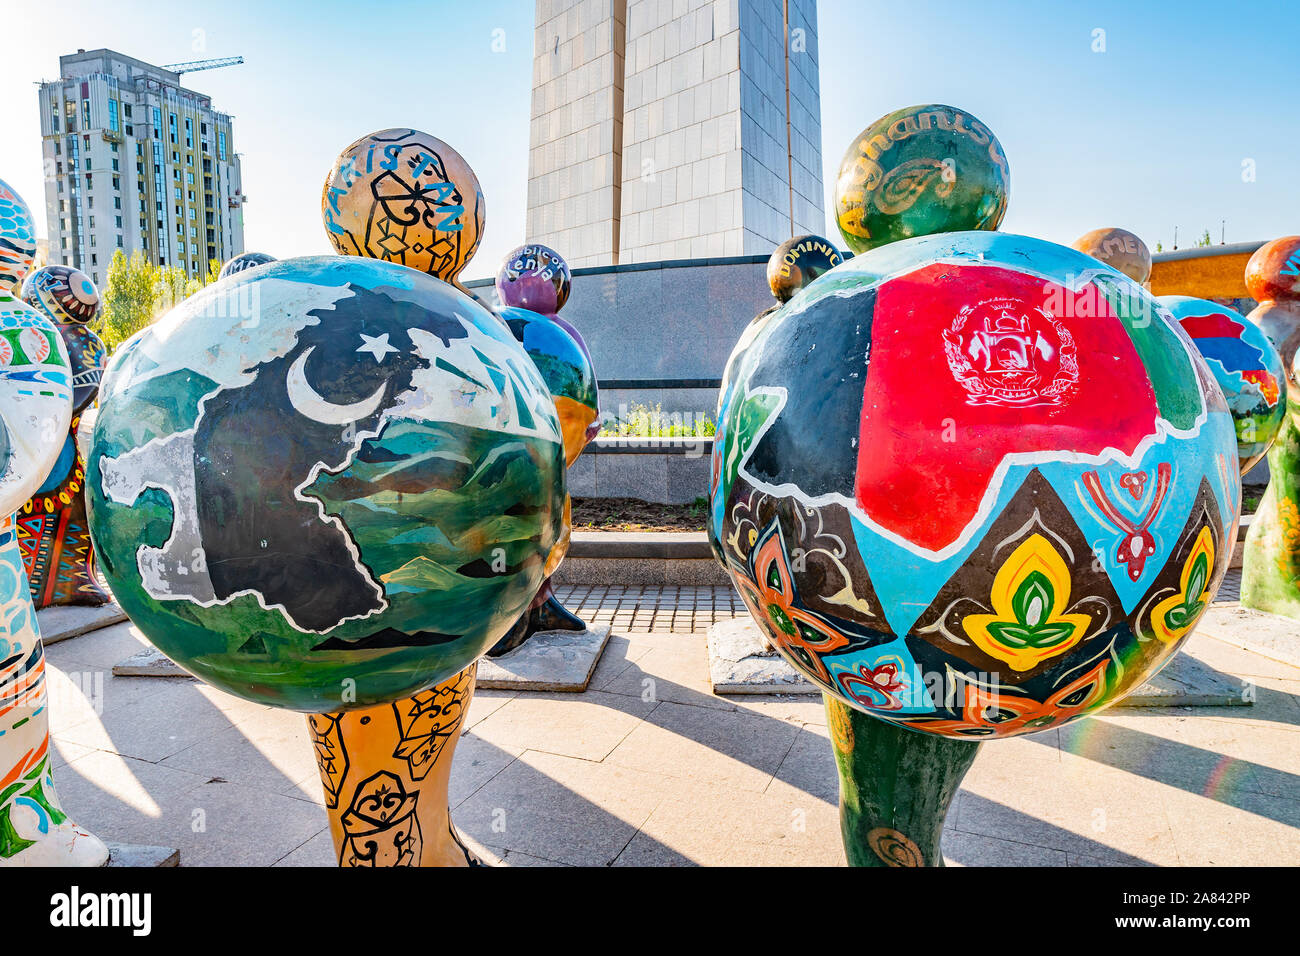 Nur-Sultan Astana Central City Tsentralnyy Gorodskoy Park View of Sculpture Holding Pakistan and Afghanistan Balls on a Sunny Blue Sky Day Stock Photo